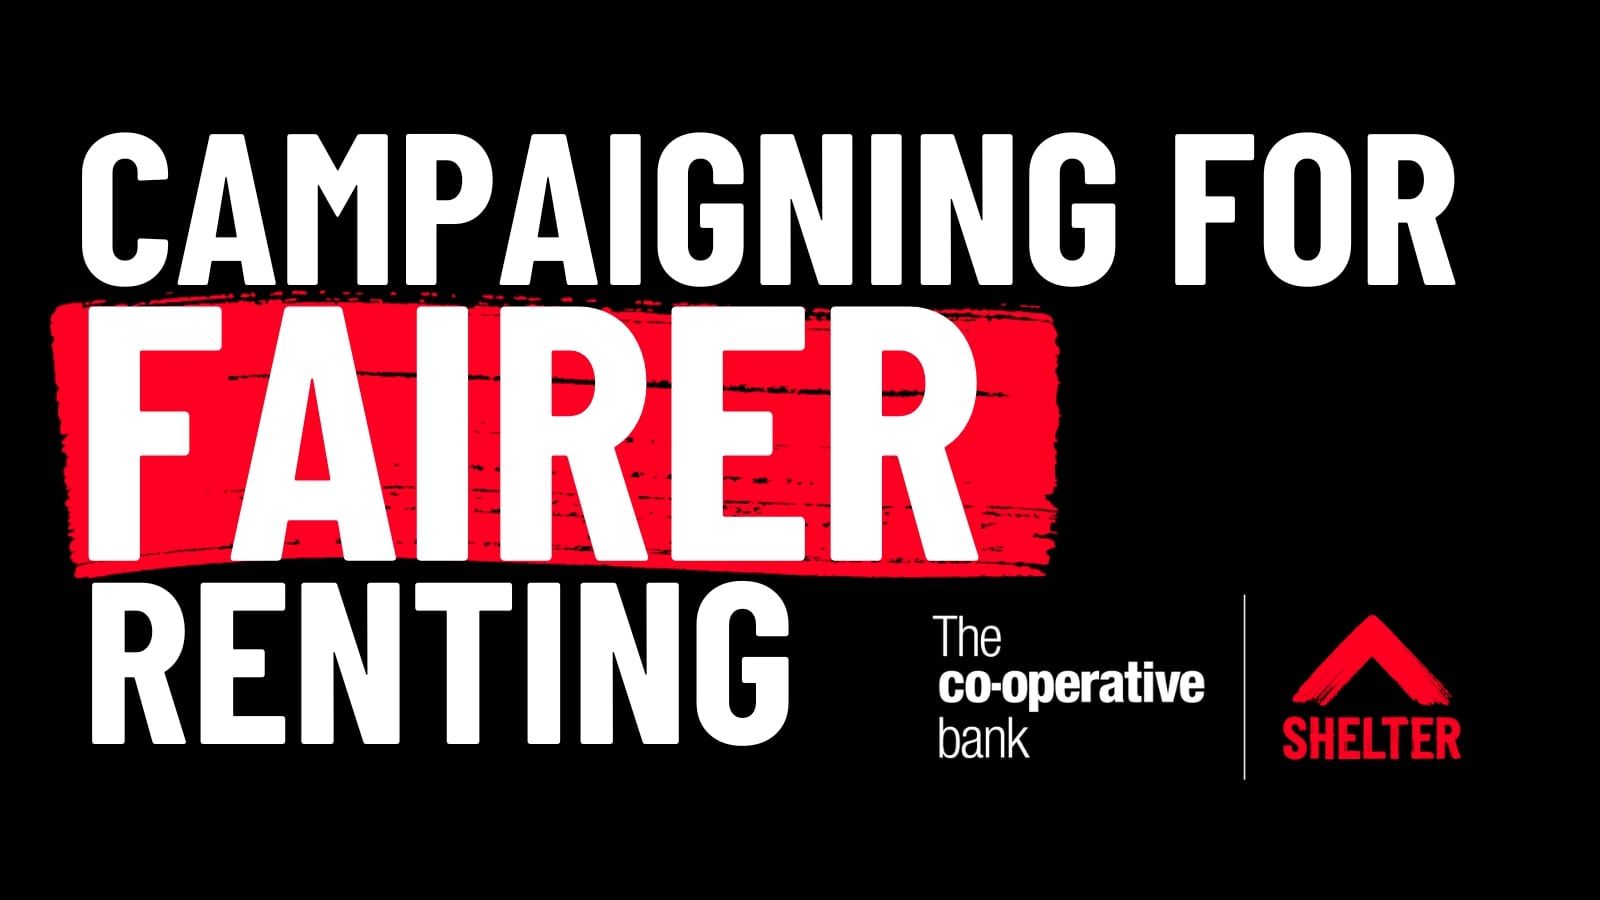 Campaigning for fairer renting with The Co-operative Bank and Shelter